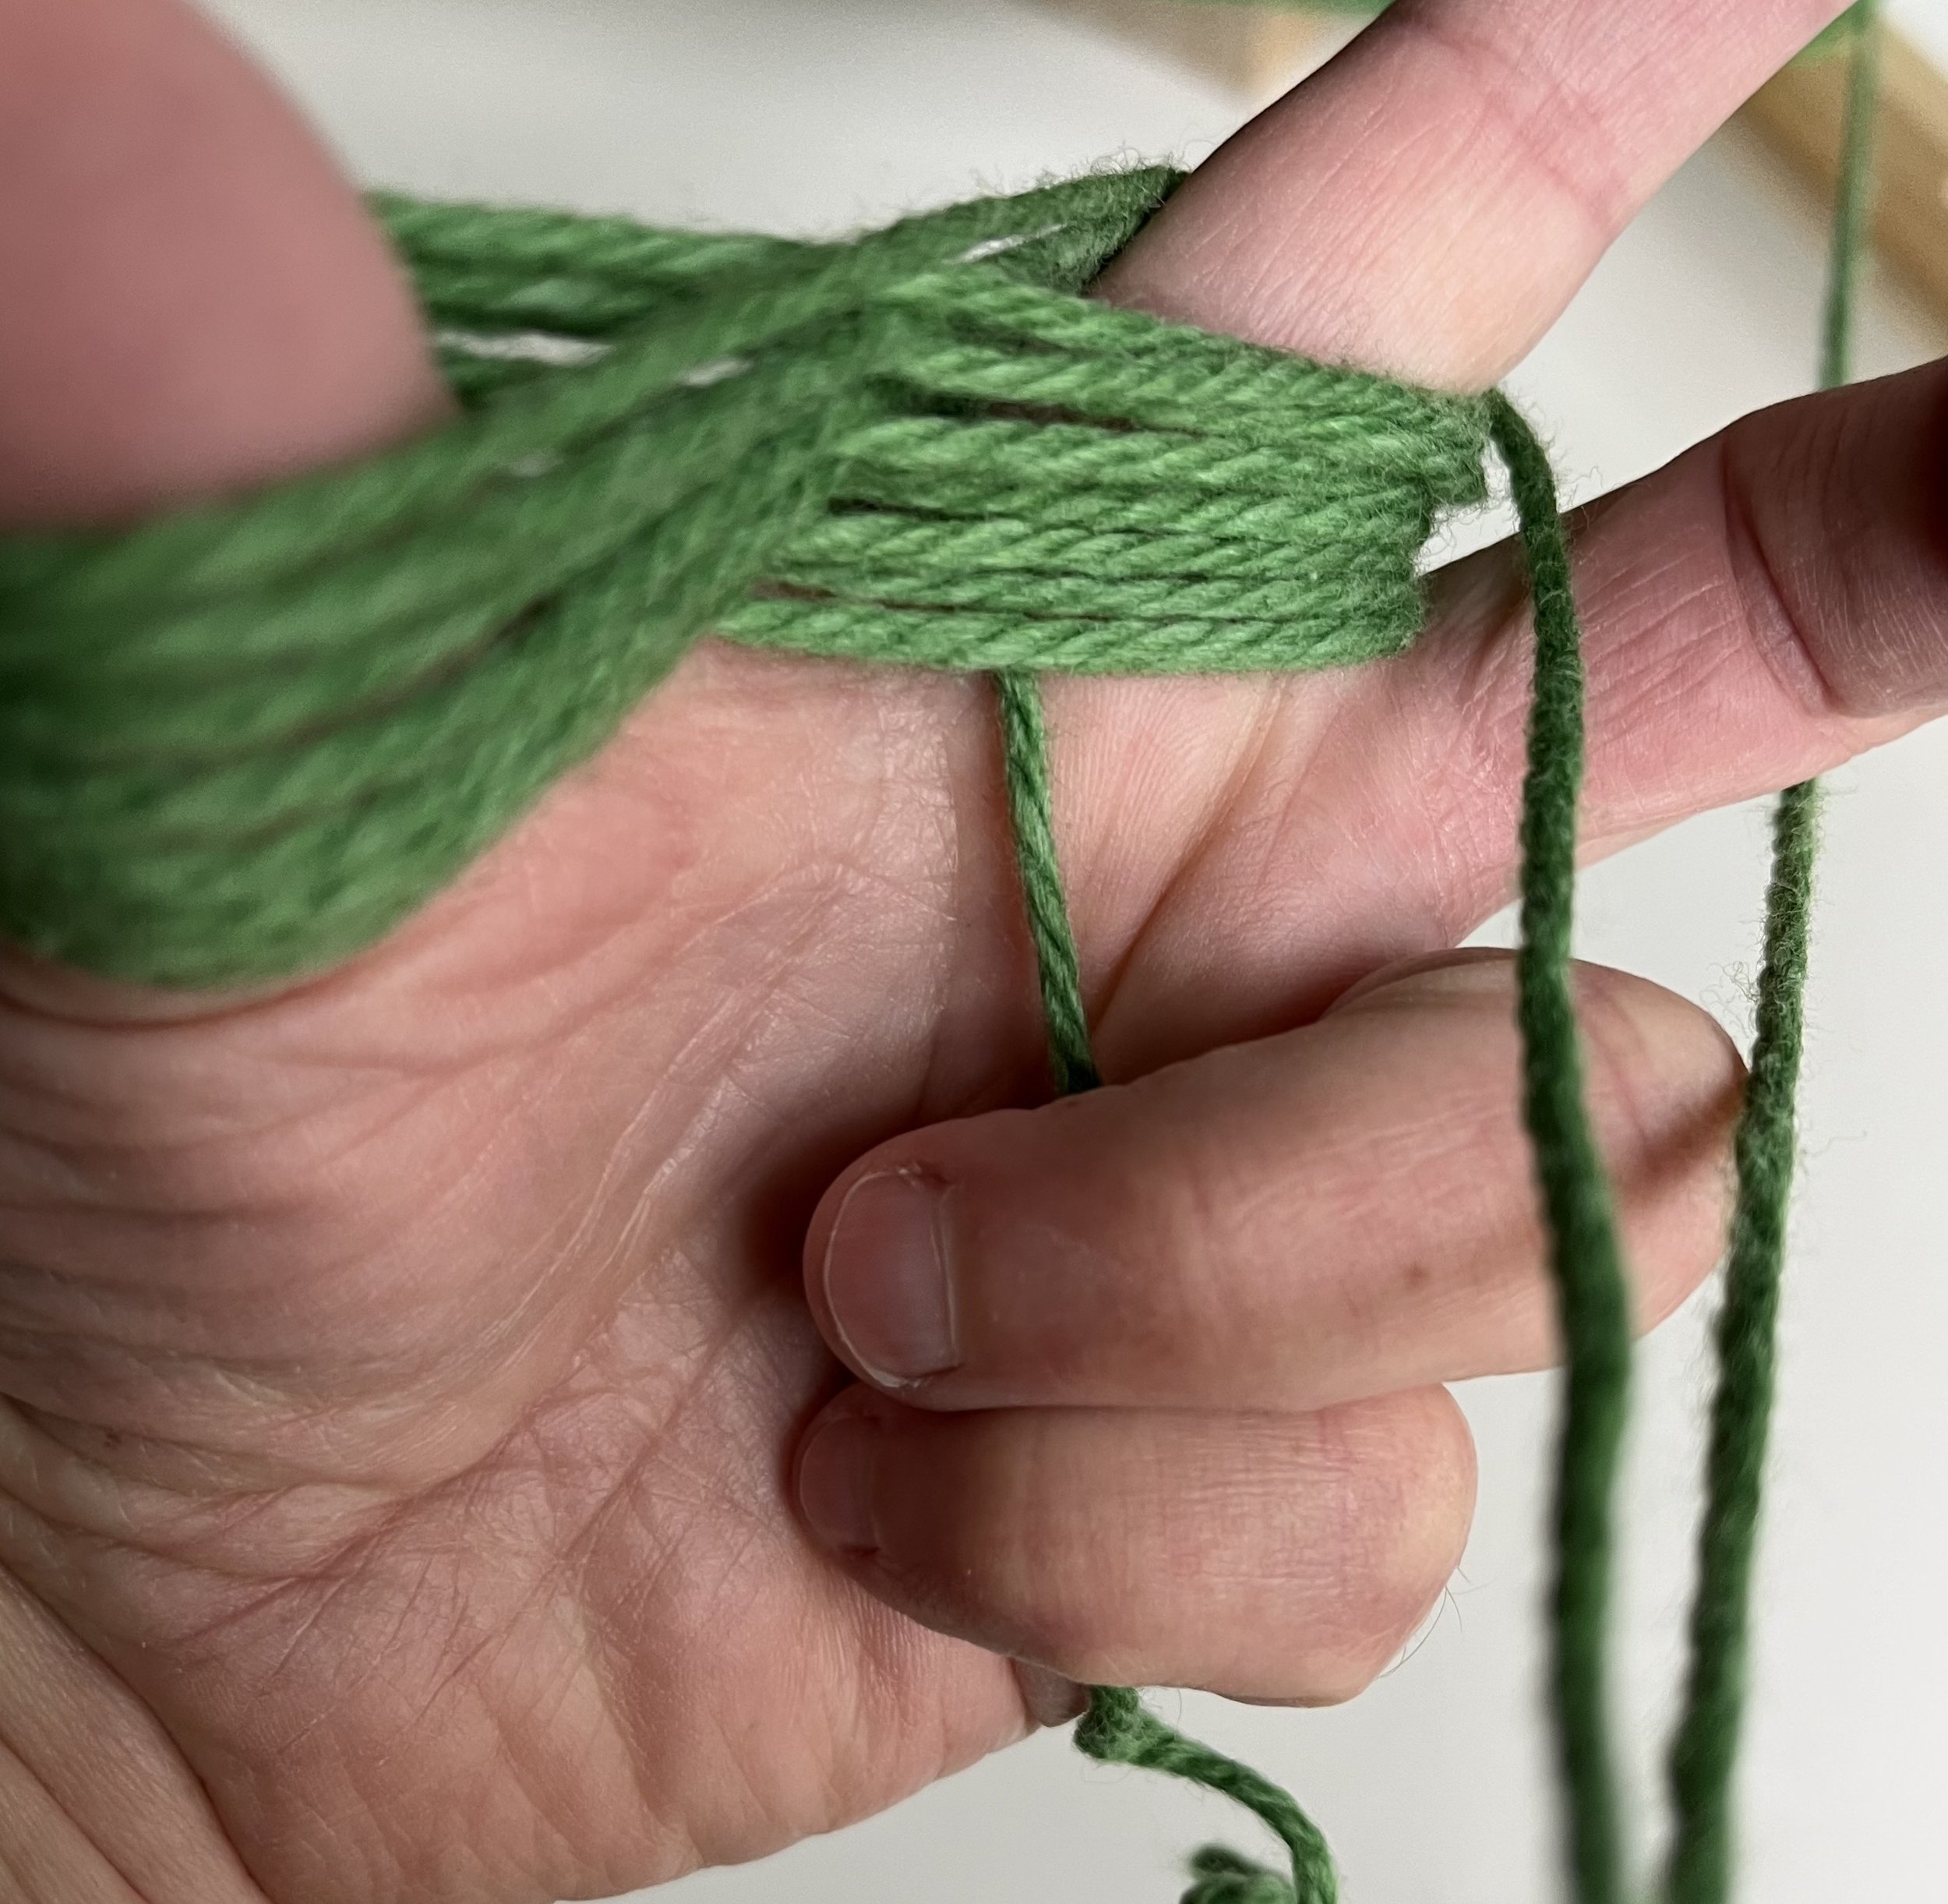 Ideal Delusions: The Best Way to Hand Wind a Ball of Yarn